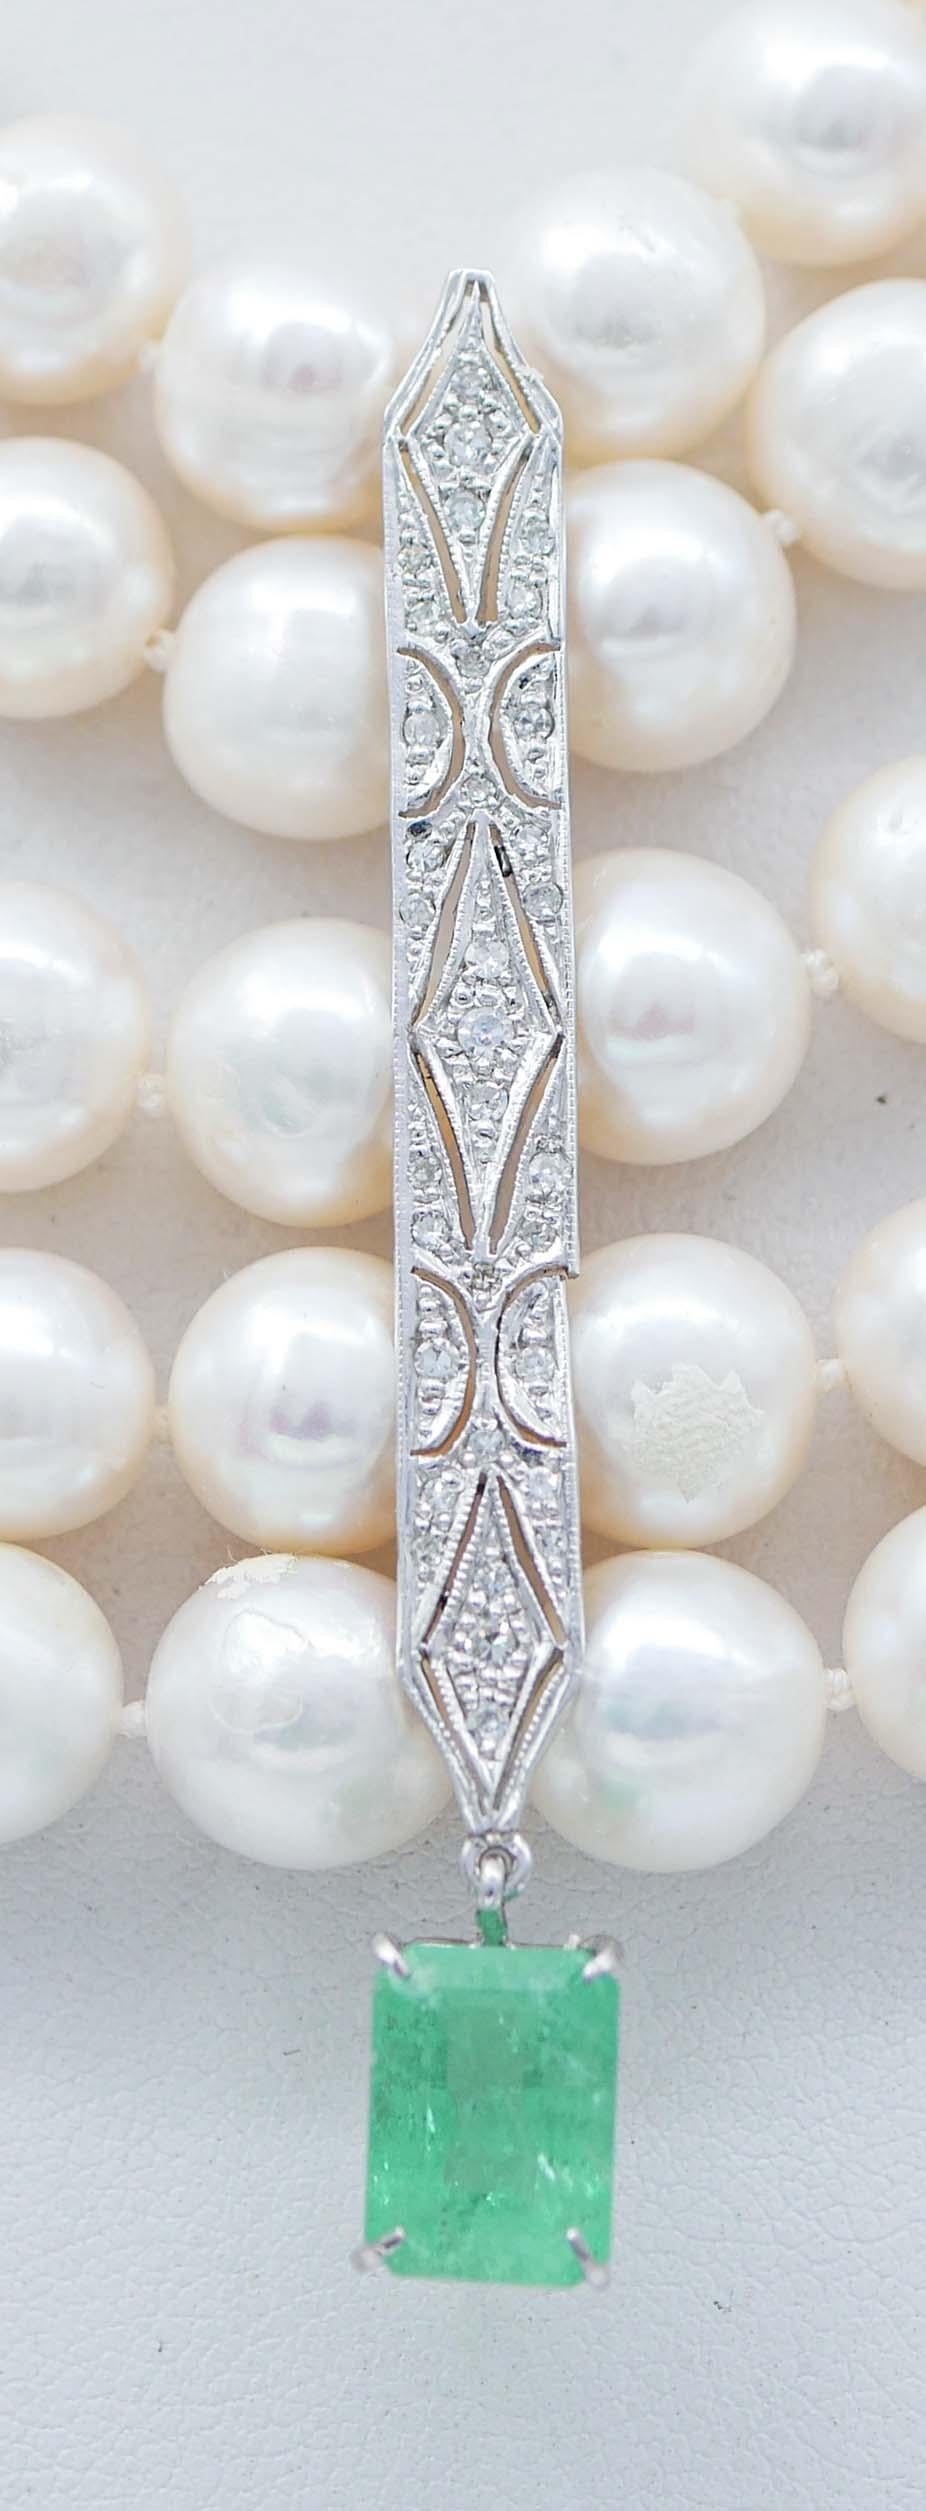 SHIPPING POLICY: 
No additional costs will be added to this order. 
Shipping costs will be totally covered by the seller (customs duties included).

Elegant necklace mounted with five rows of pearls, divided by a platinum structure in the central